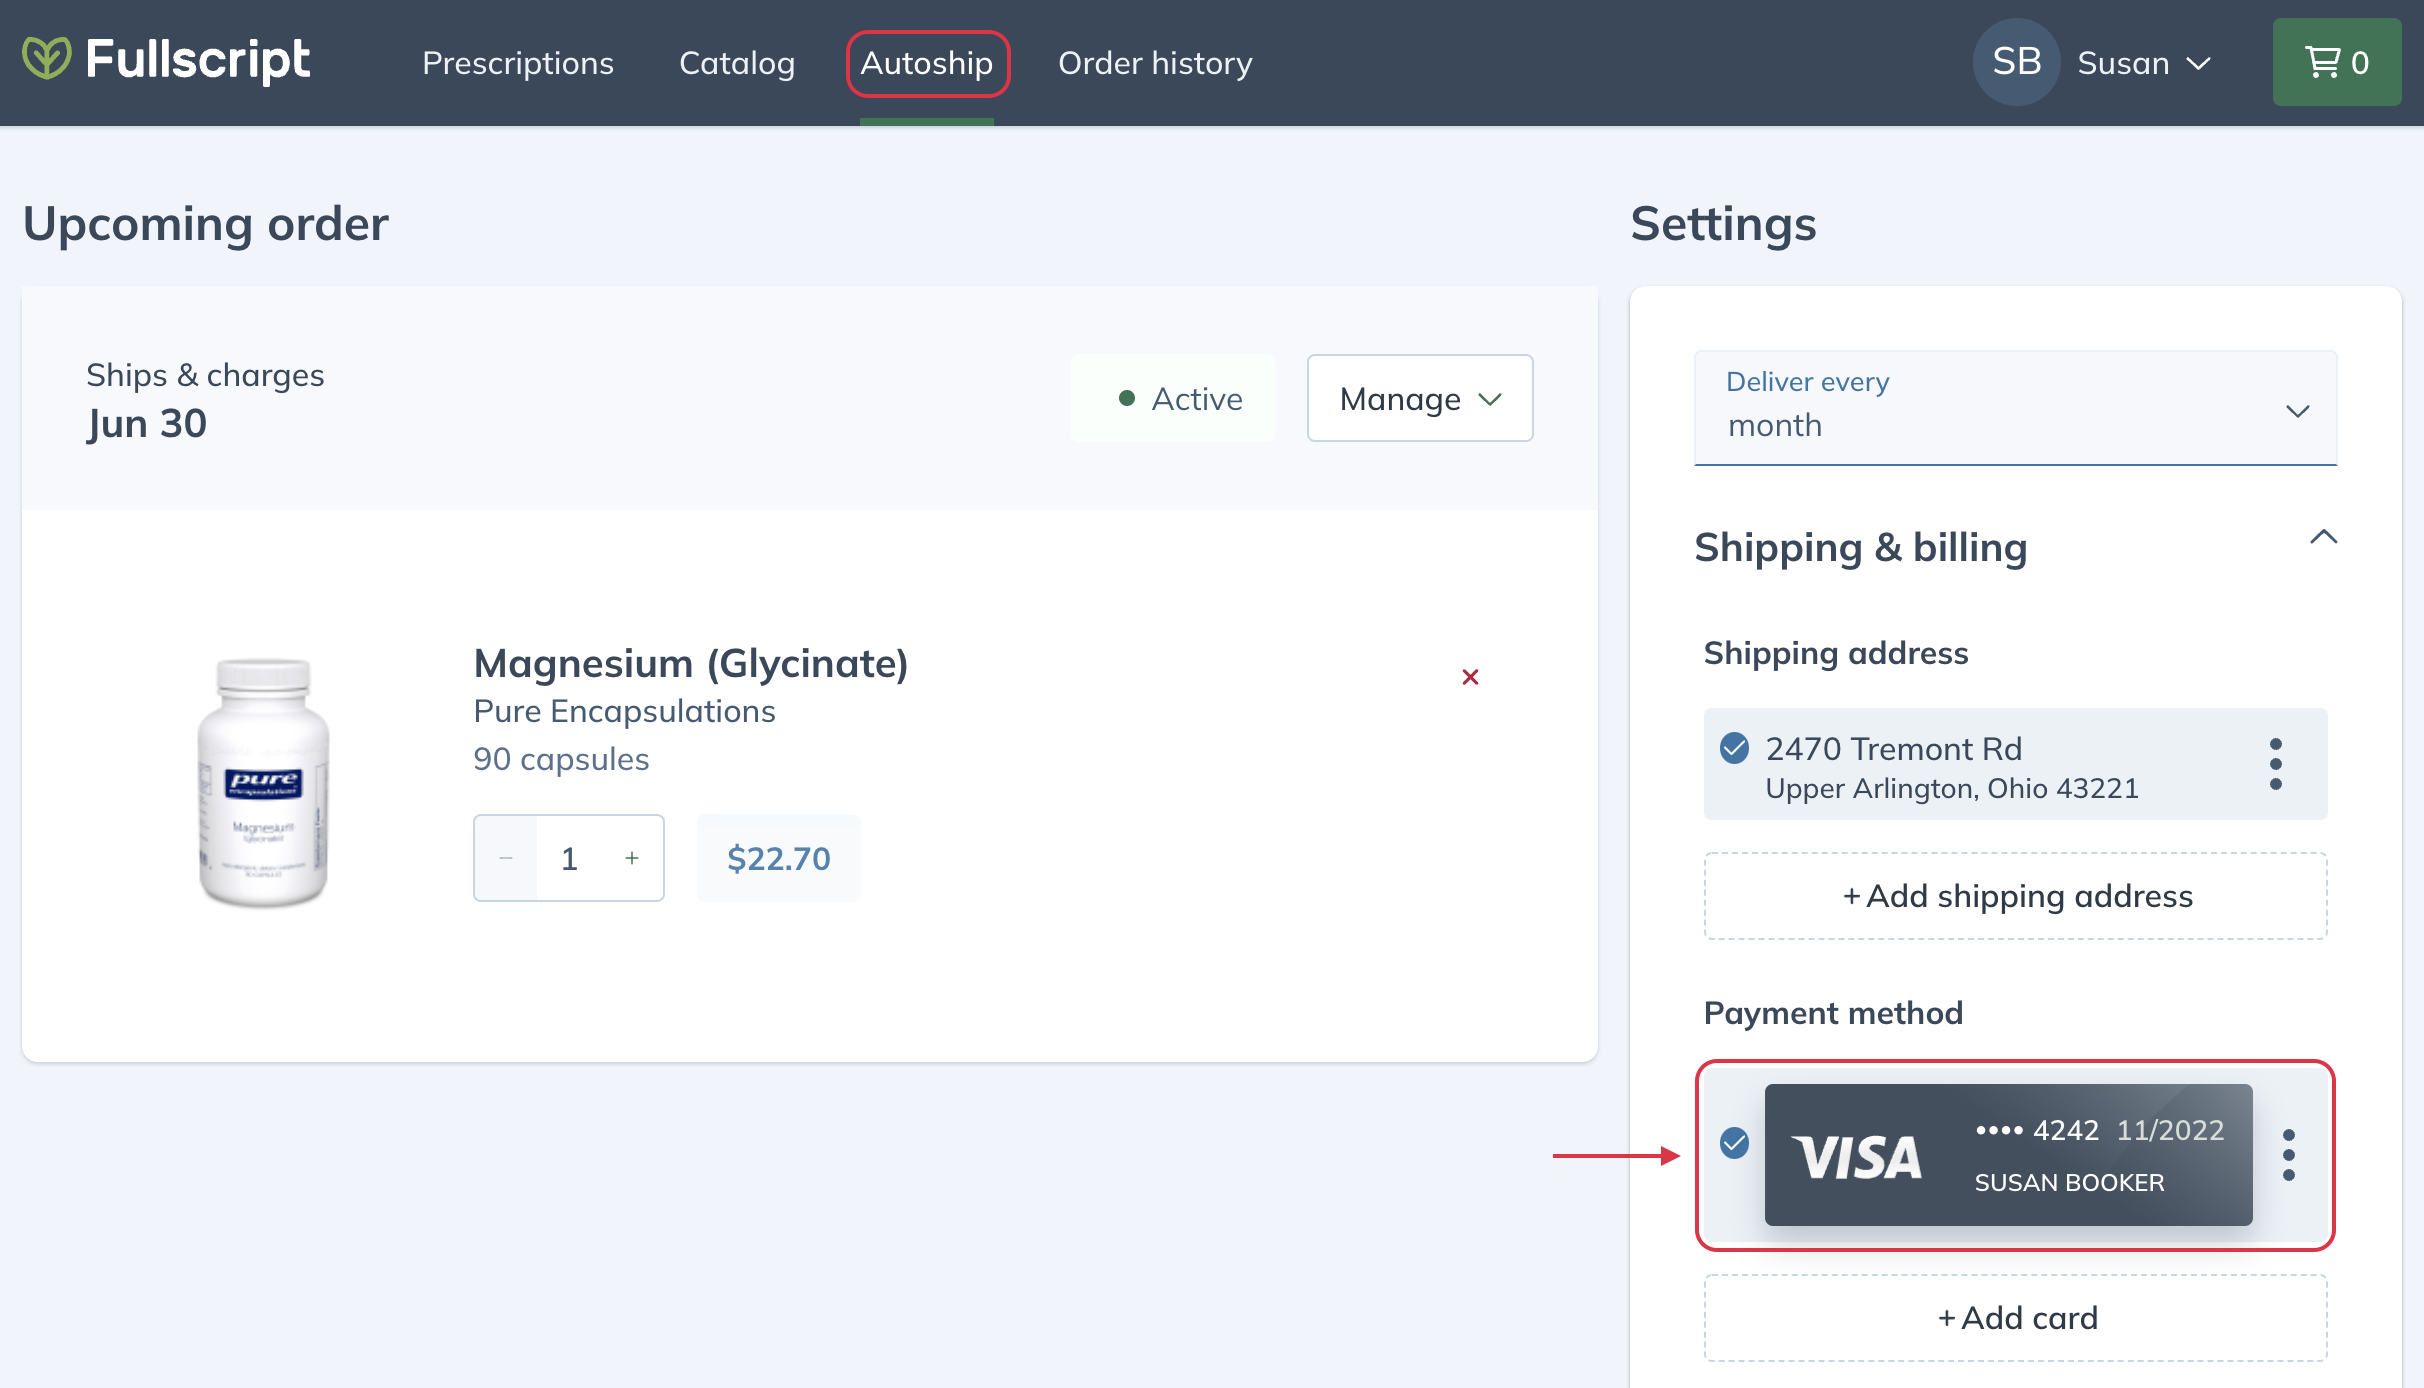 Viewing the payment method used for Autoship.